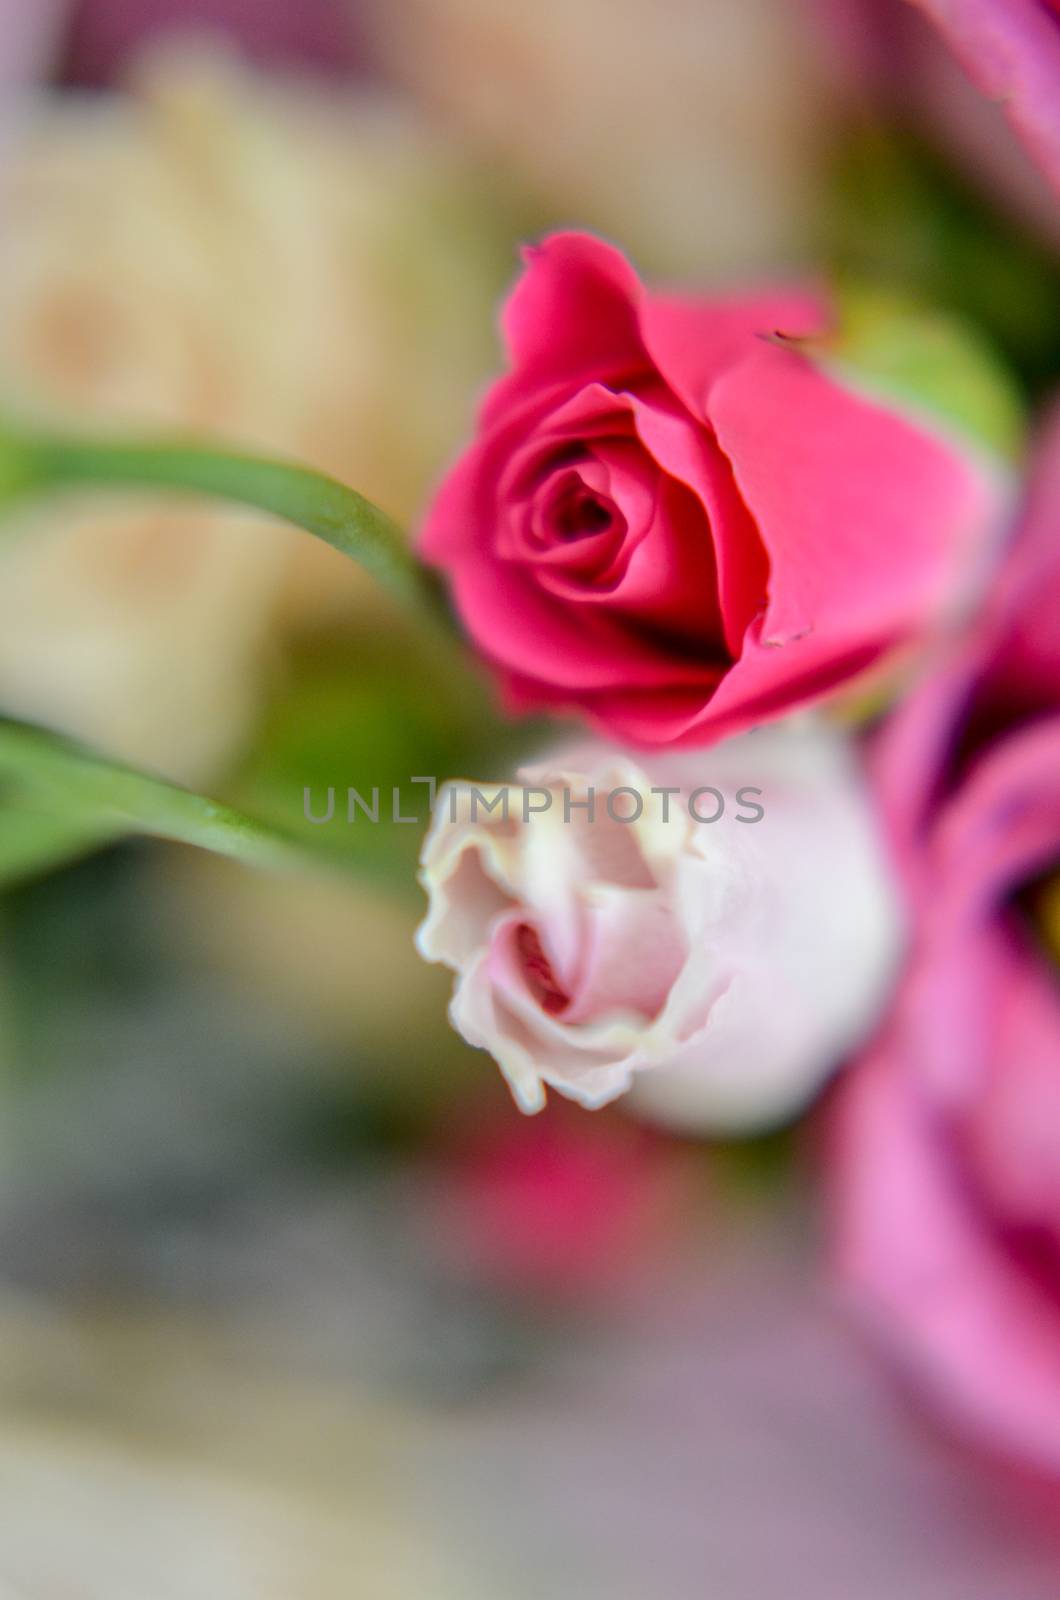 Pink and white roses in bouquet with blured background. Retro filter.